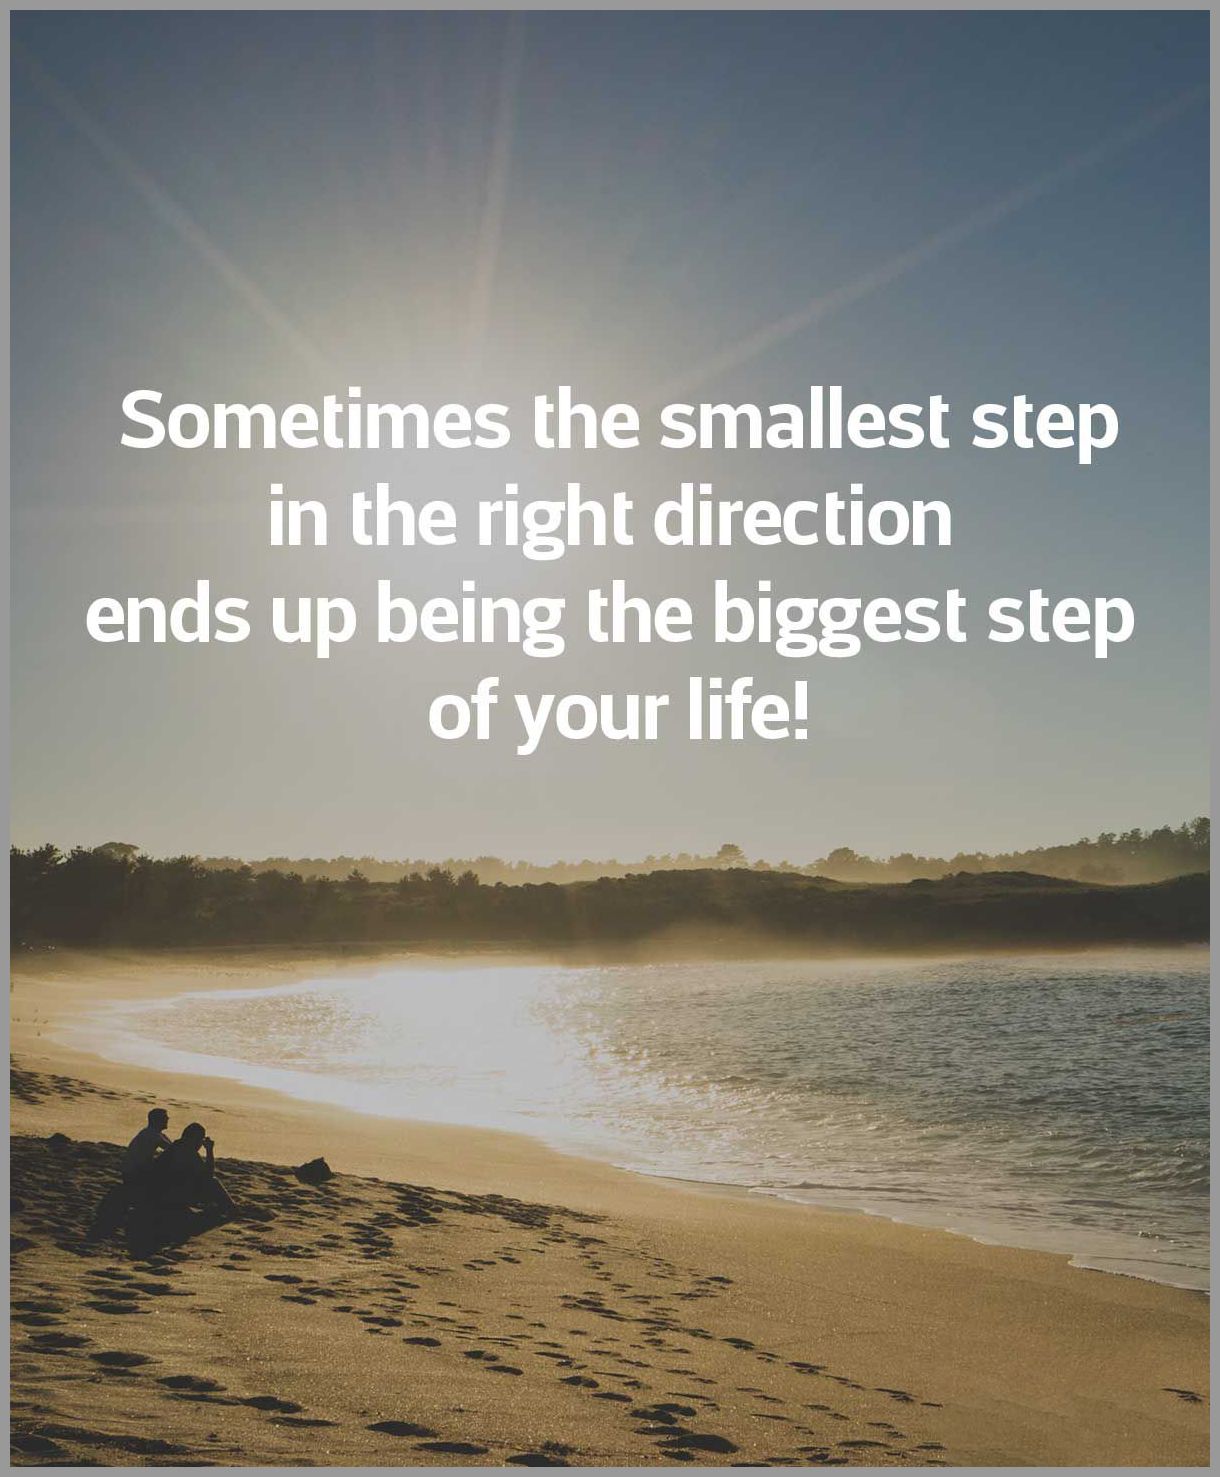 Sometimes the smallest step in the right direction ends up being the biggest step of your life